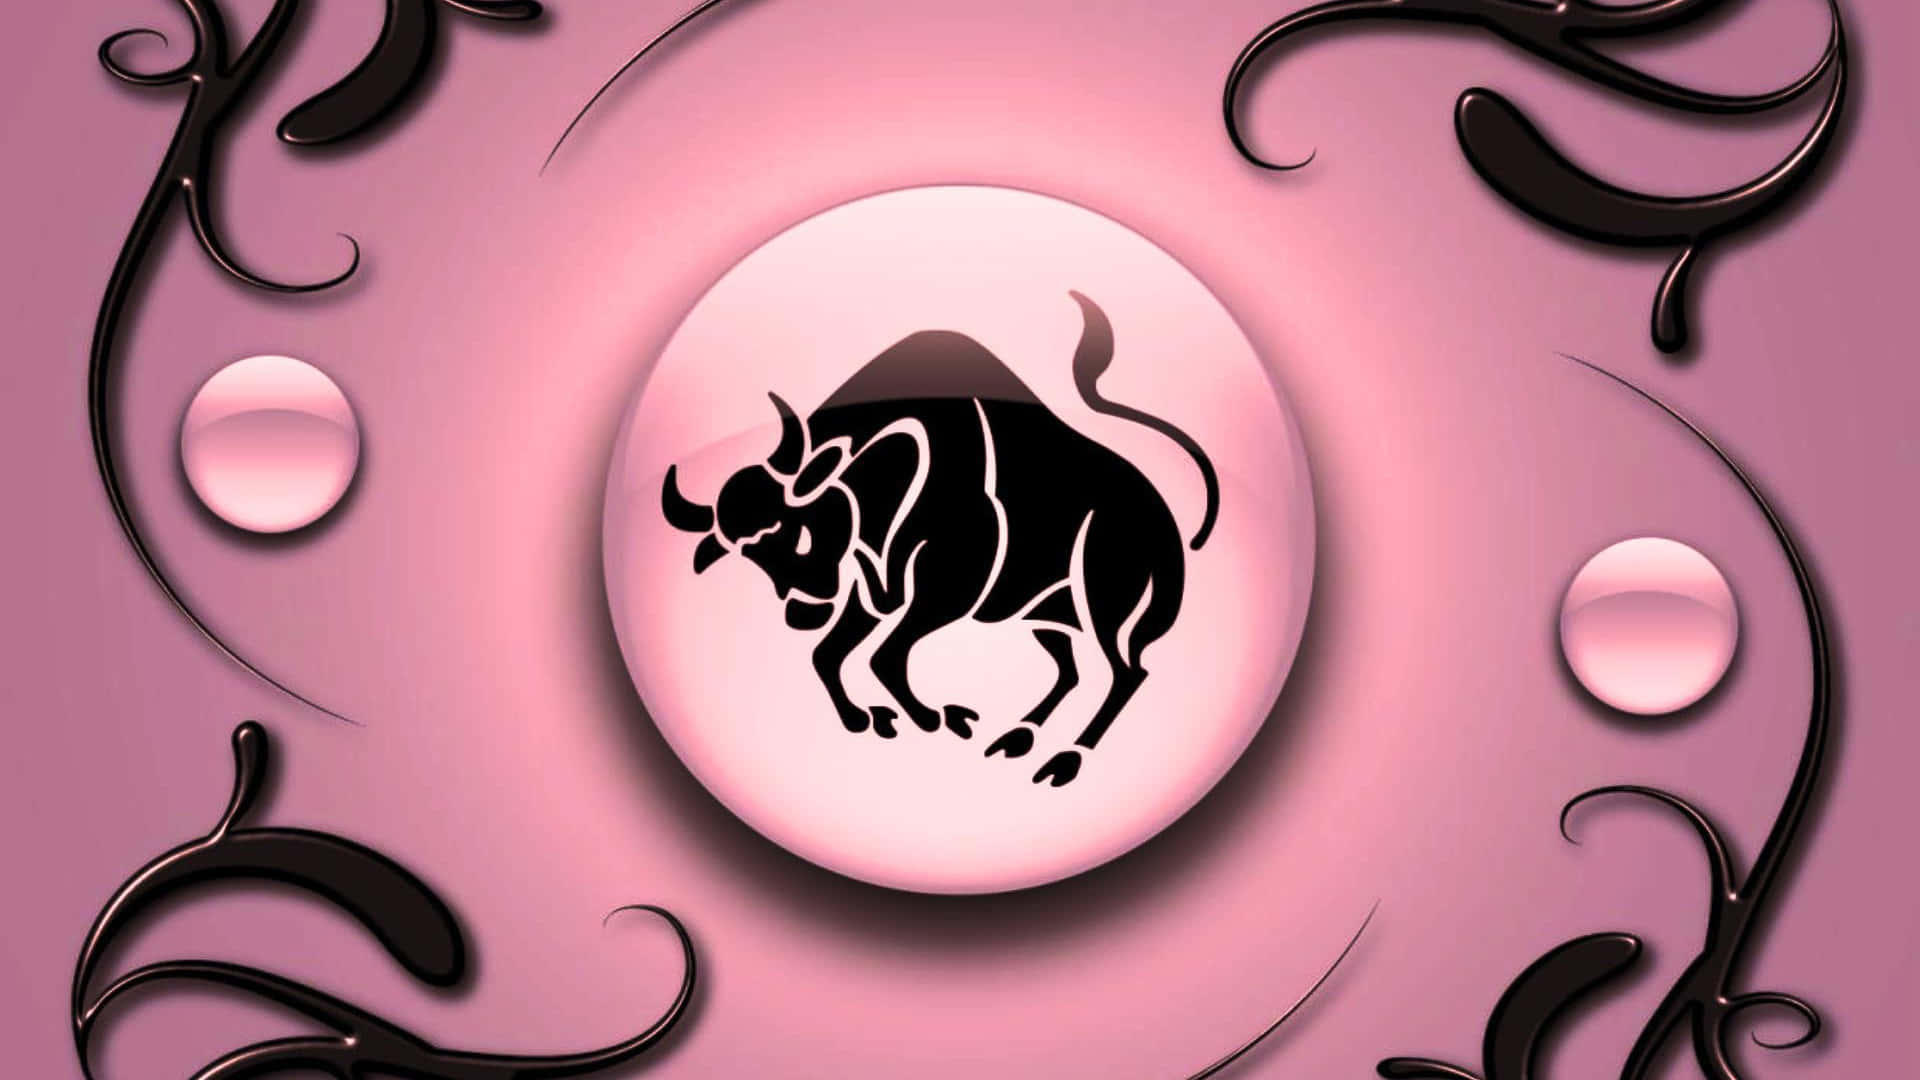 A Taurus symbol with a creative and colorful design